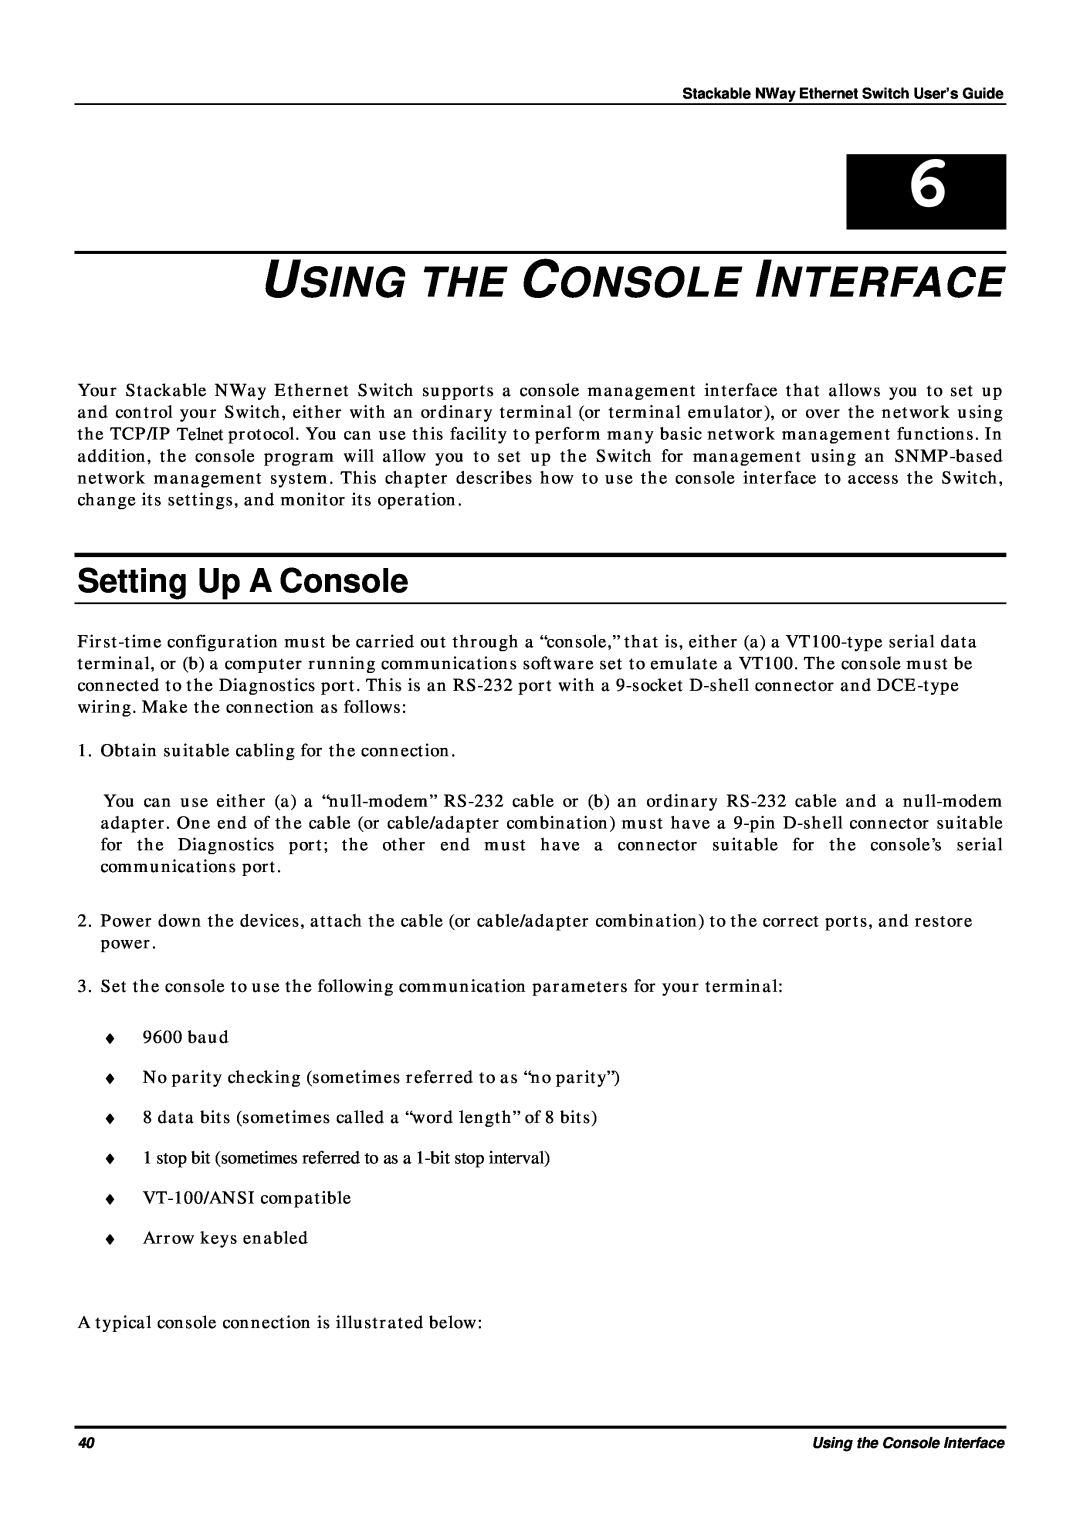 D-Link DES-3624 manual Using The Console Interface, Setting Up A Console 